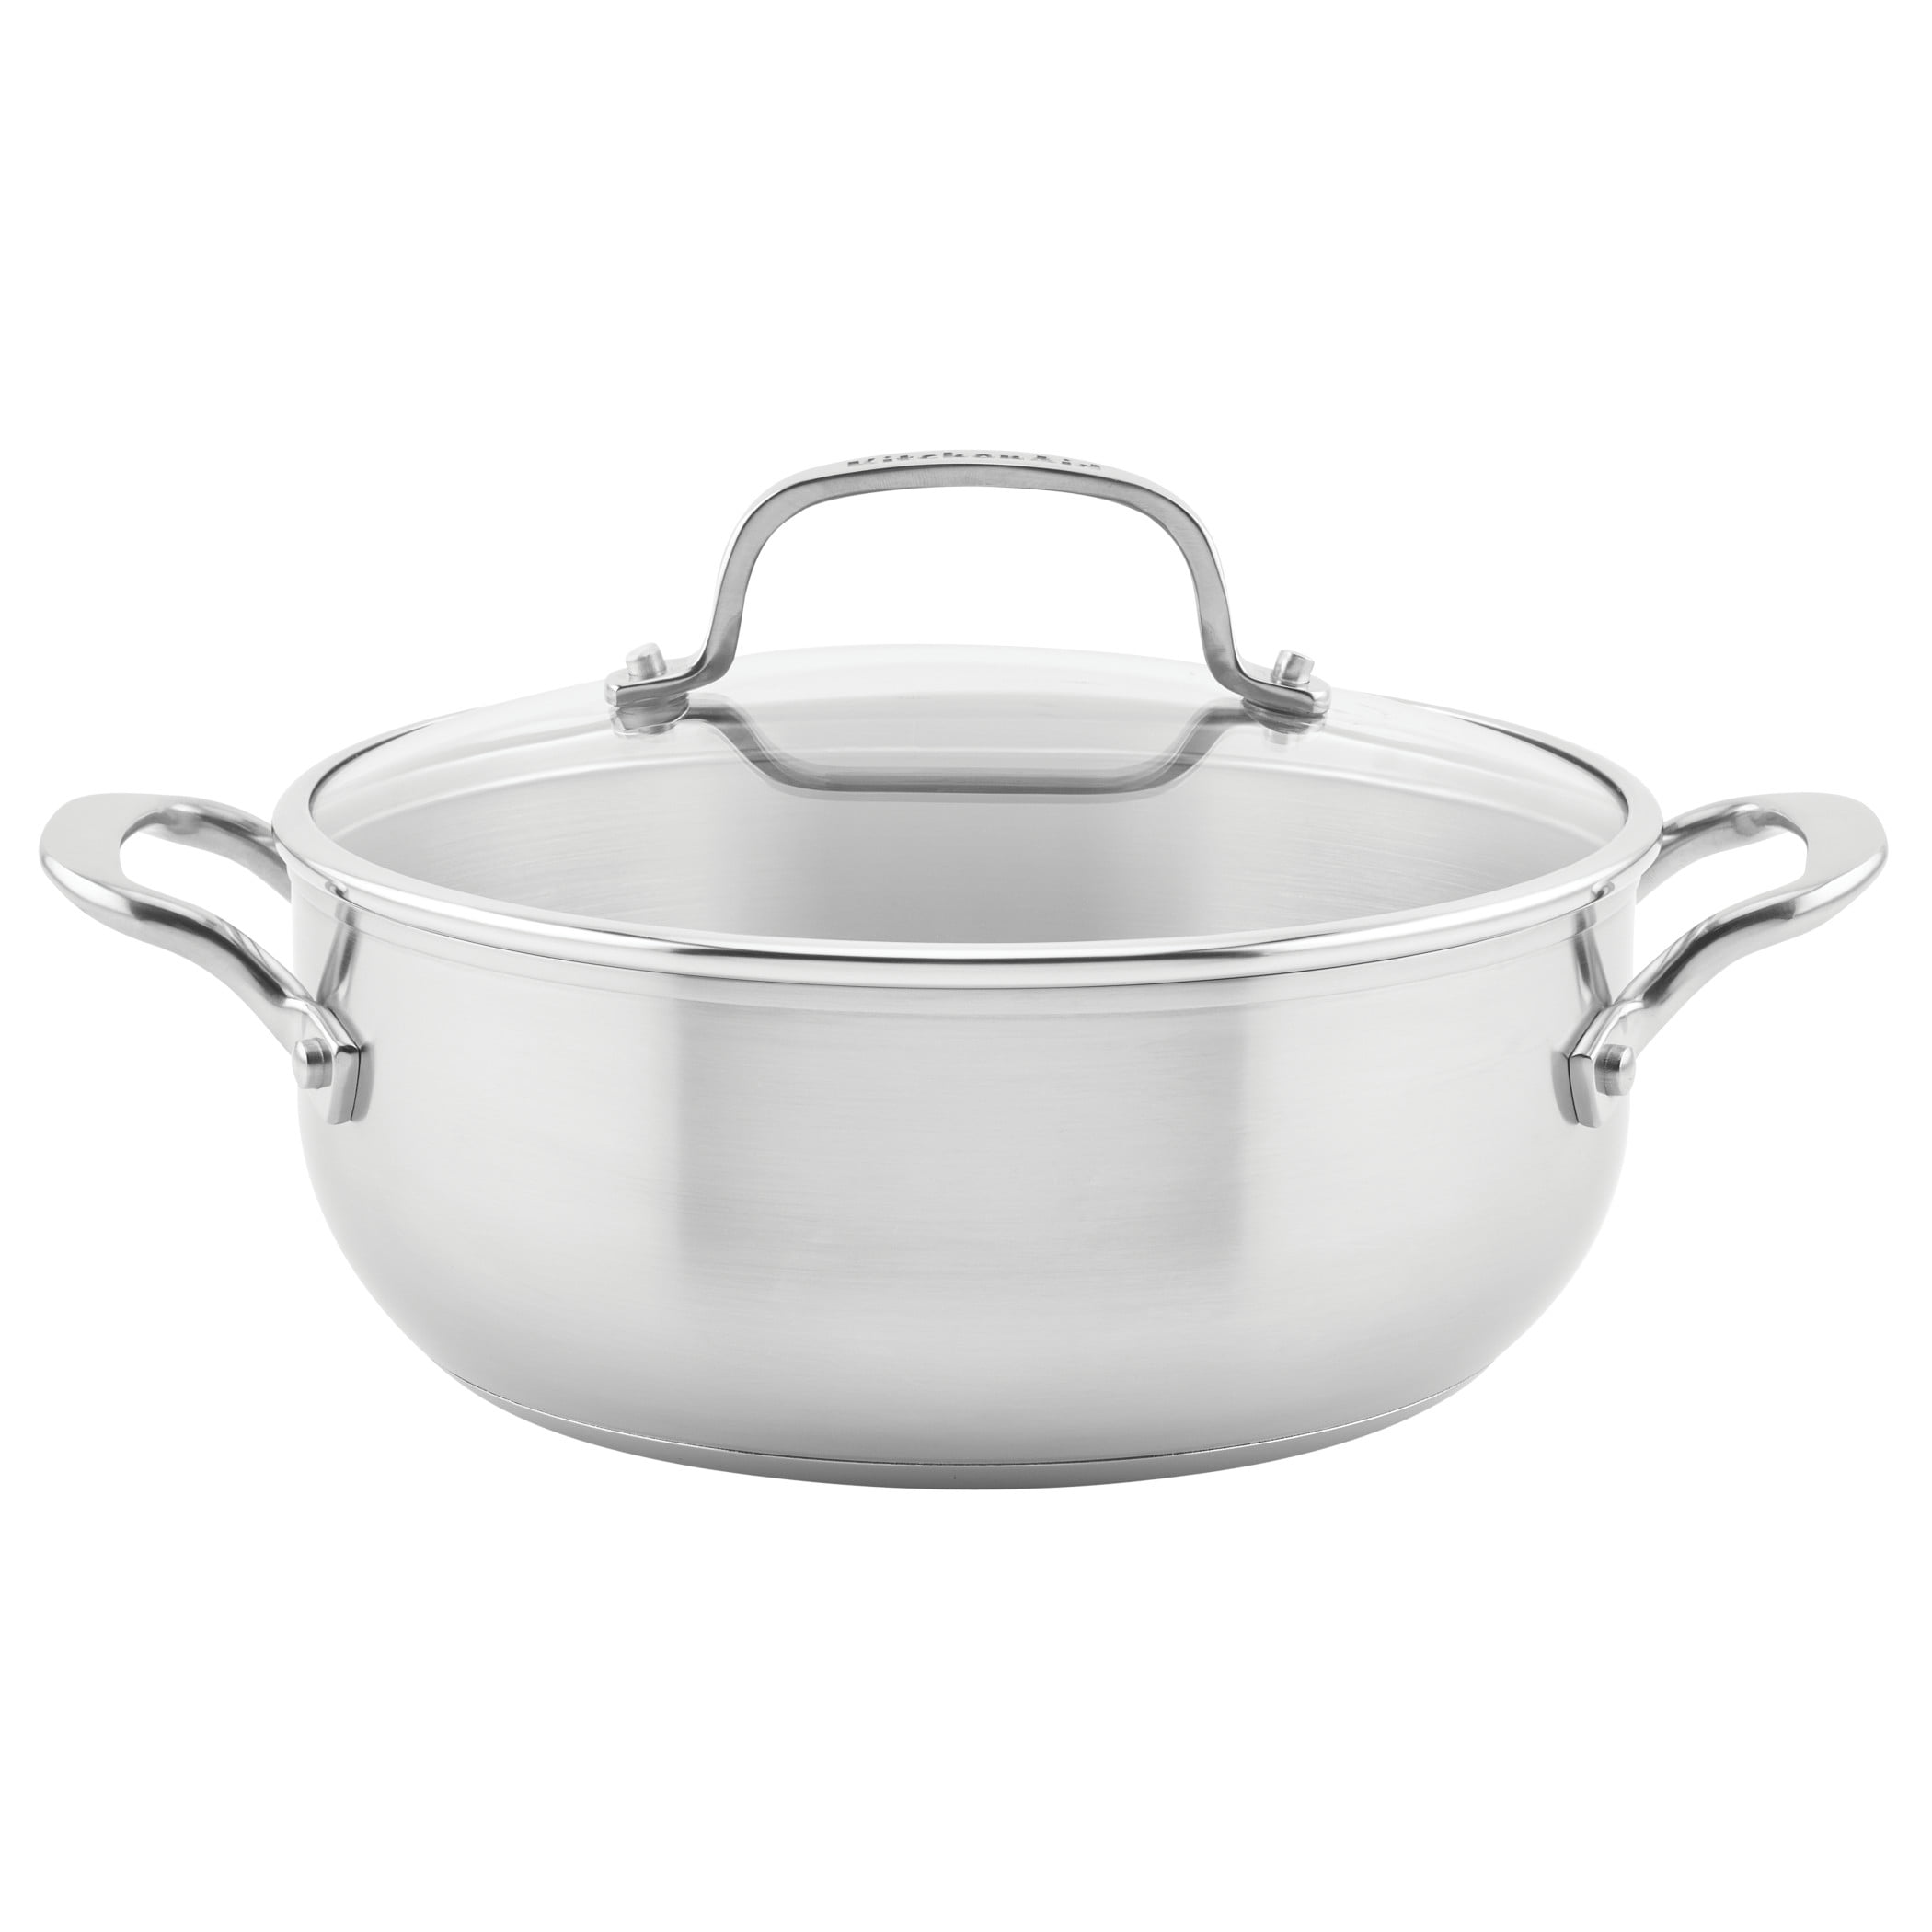 American Metalcraft (CIPO4) Large 4 qt Oval Cast Iron Casserole Dish with Handles